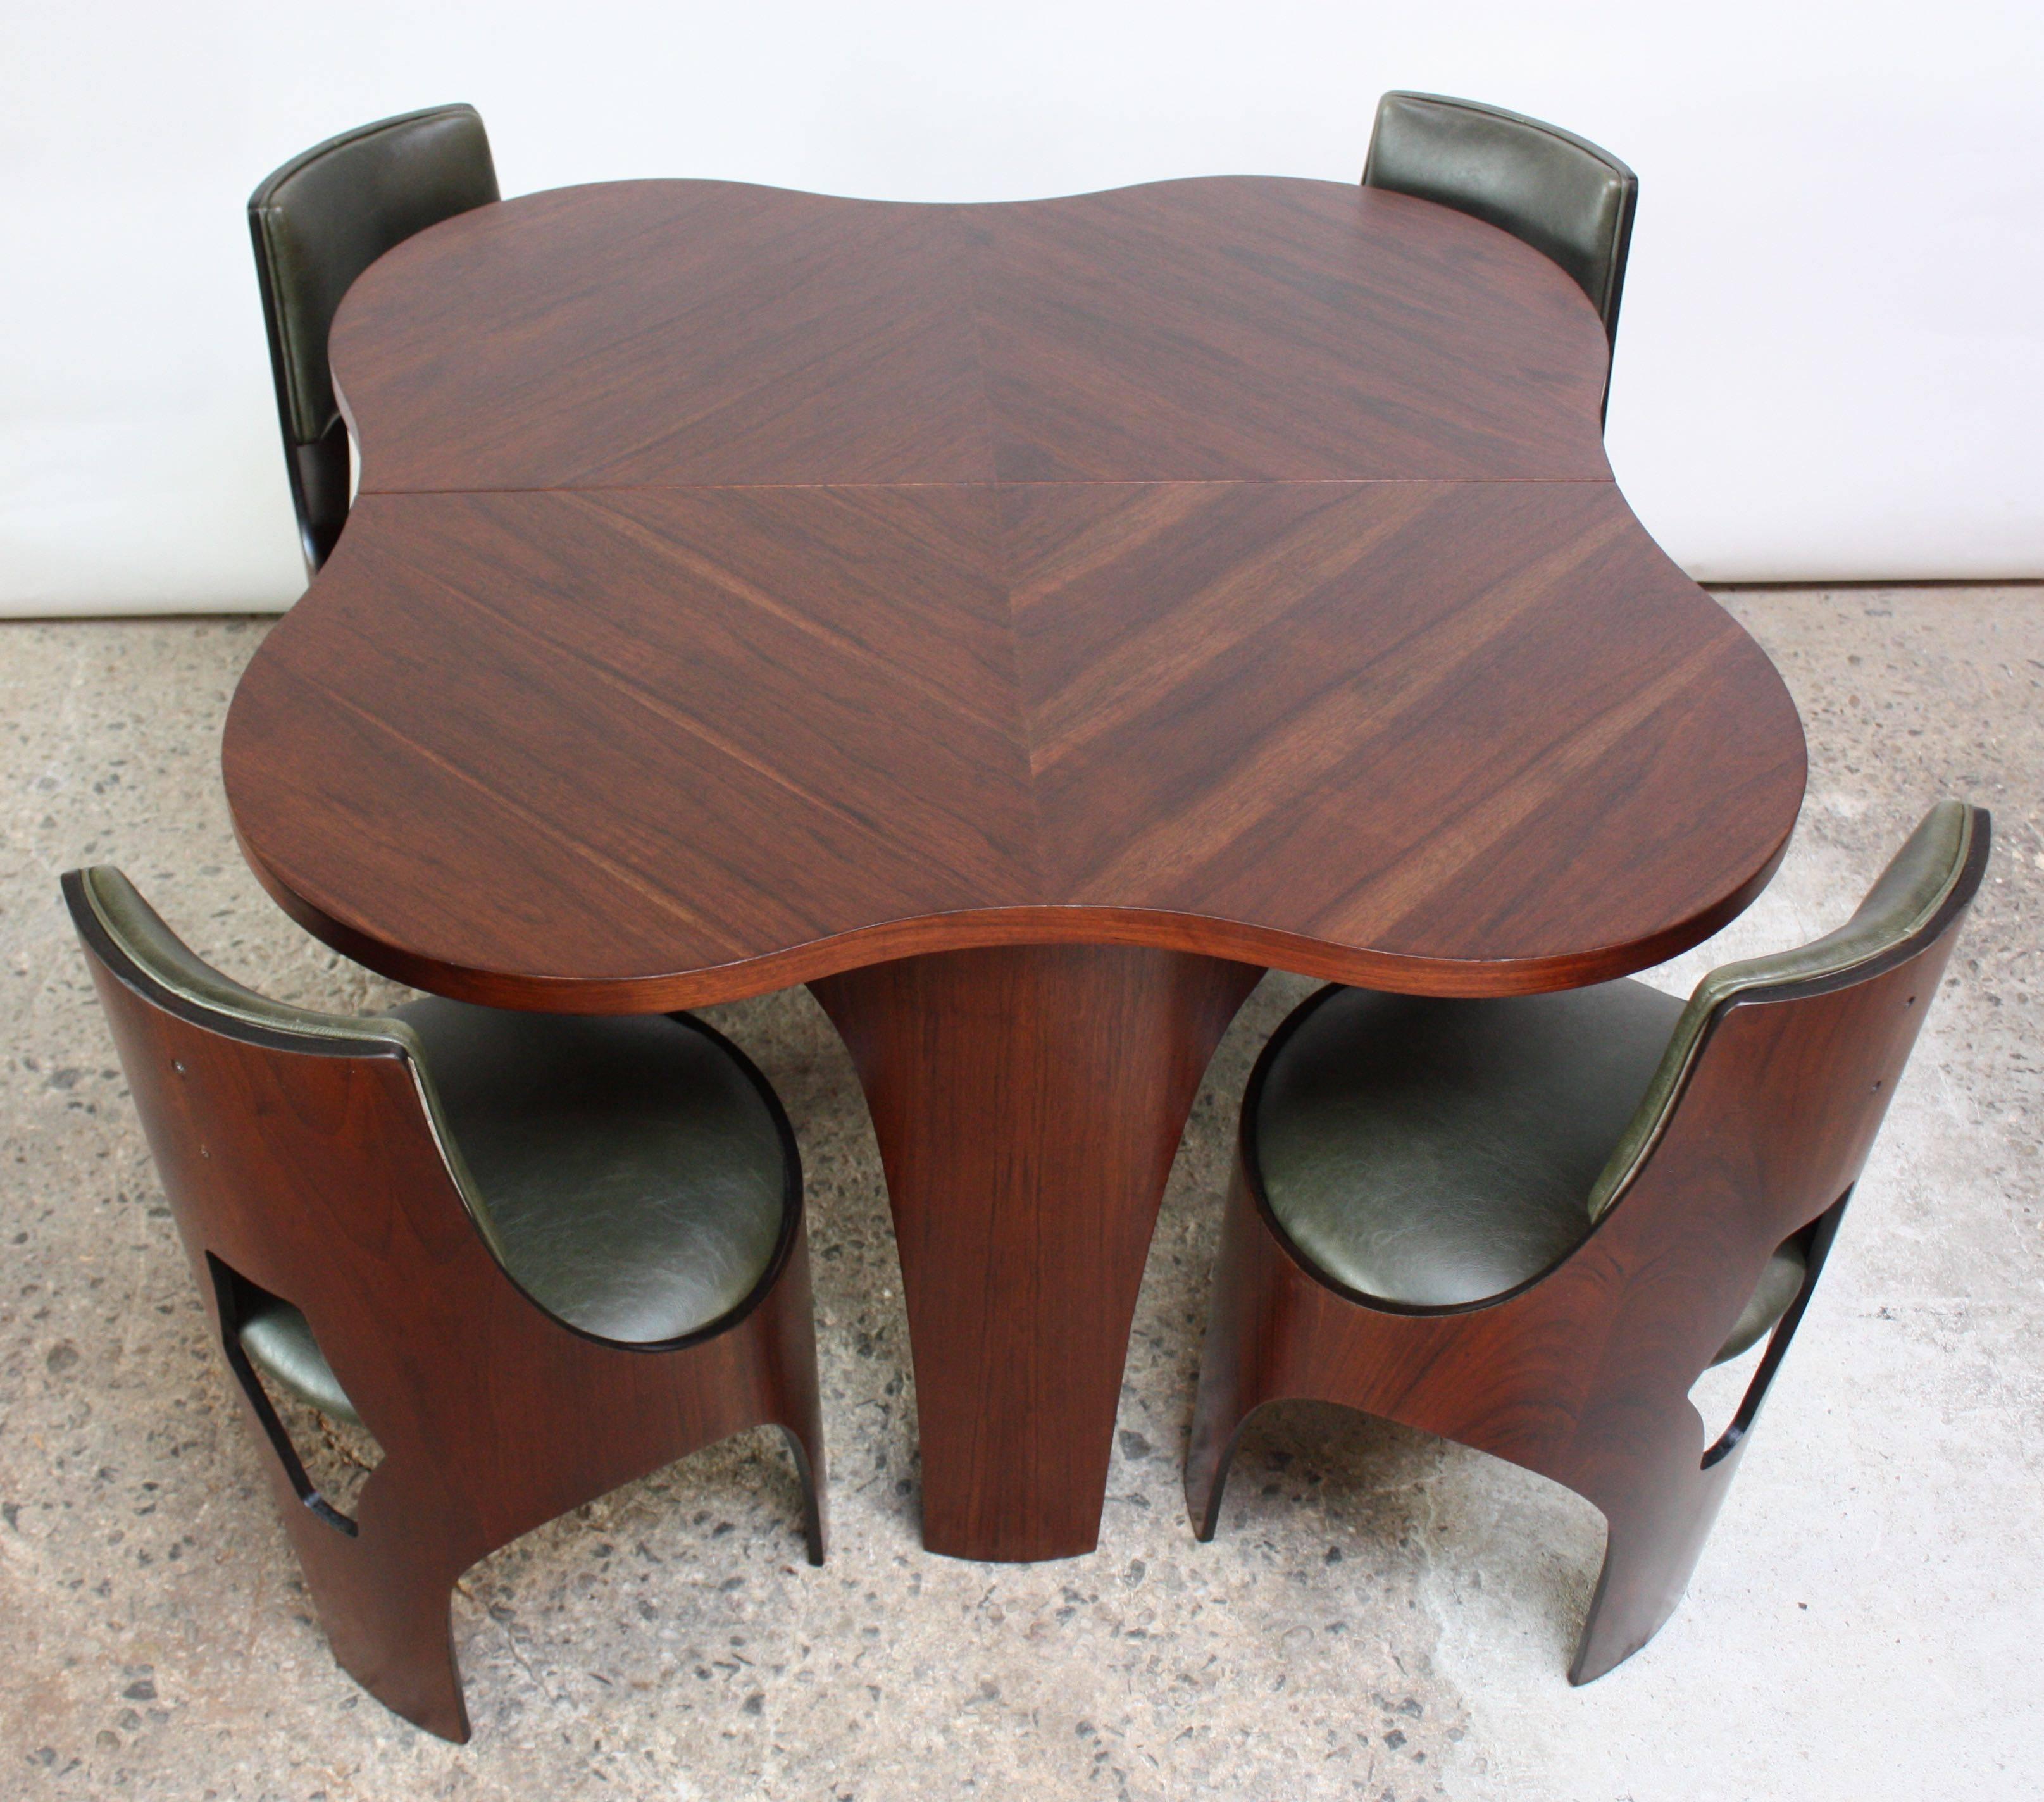 Rare Henry Glass for Richbilt MFG dining set from the 1966 'Cylindra' line, including the table (with two additional leaves) and four chairs in plywood and walnut. Unique, sculptural form and extraordinary walnut grain. 
Original vinyl has been